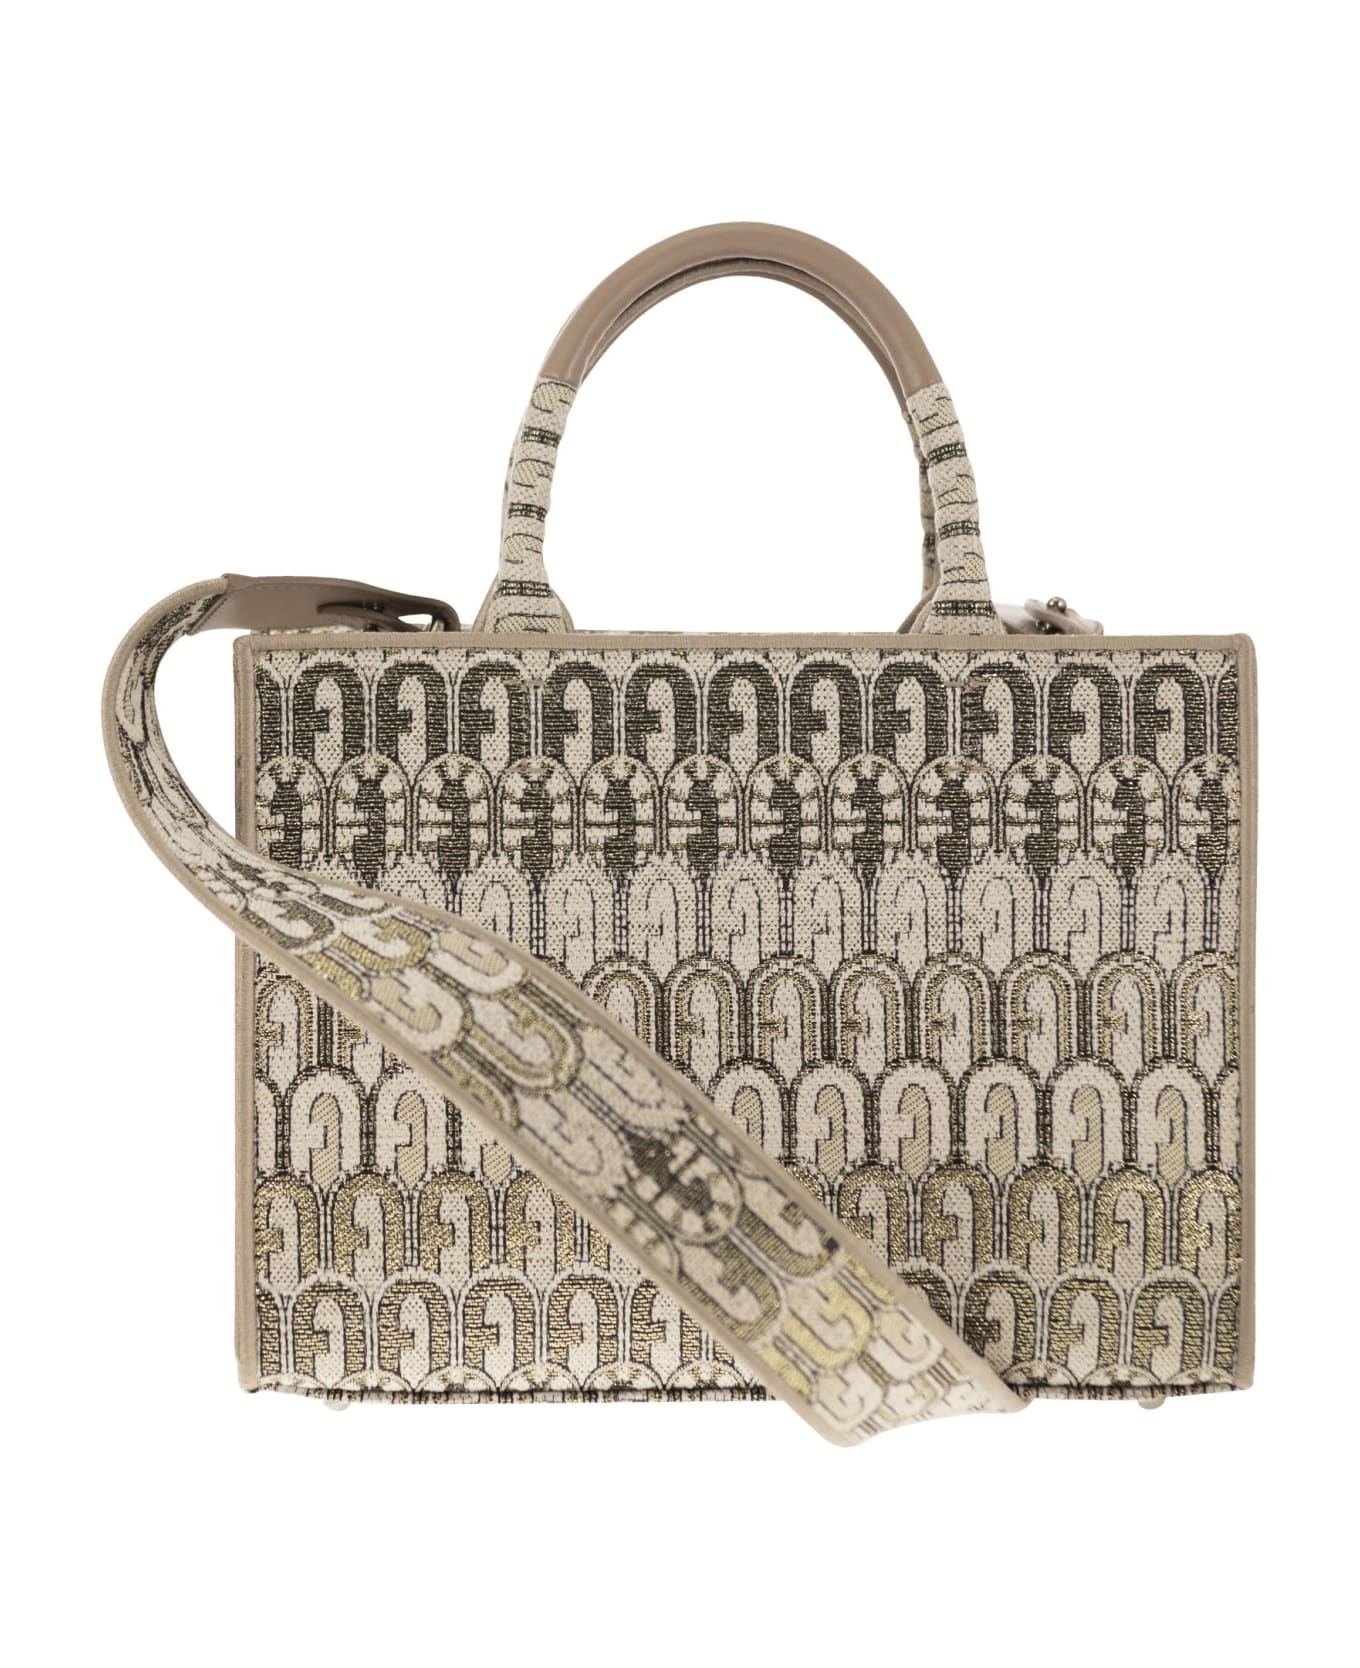 Furla Opportunity - Tote Bag Small - Beige